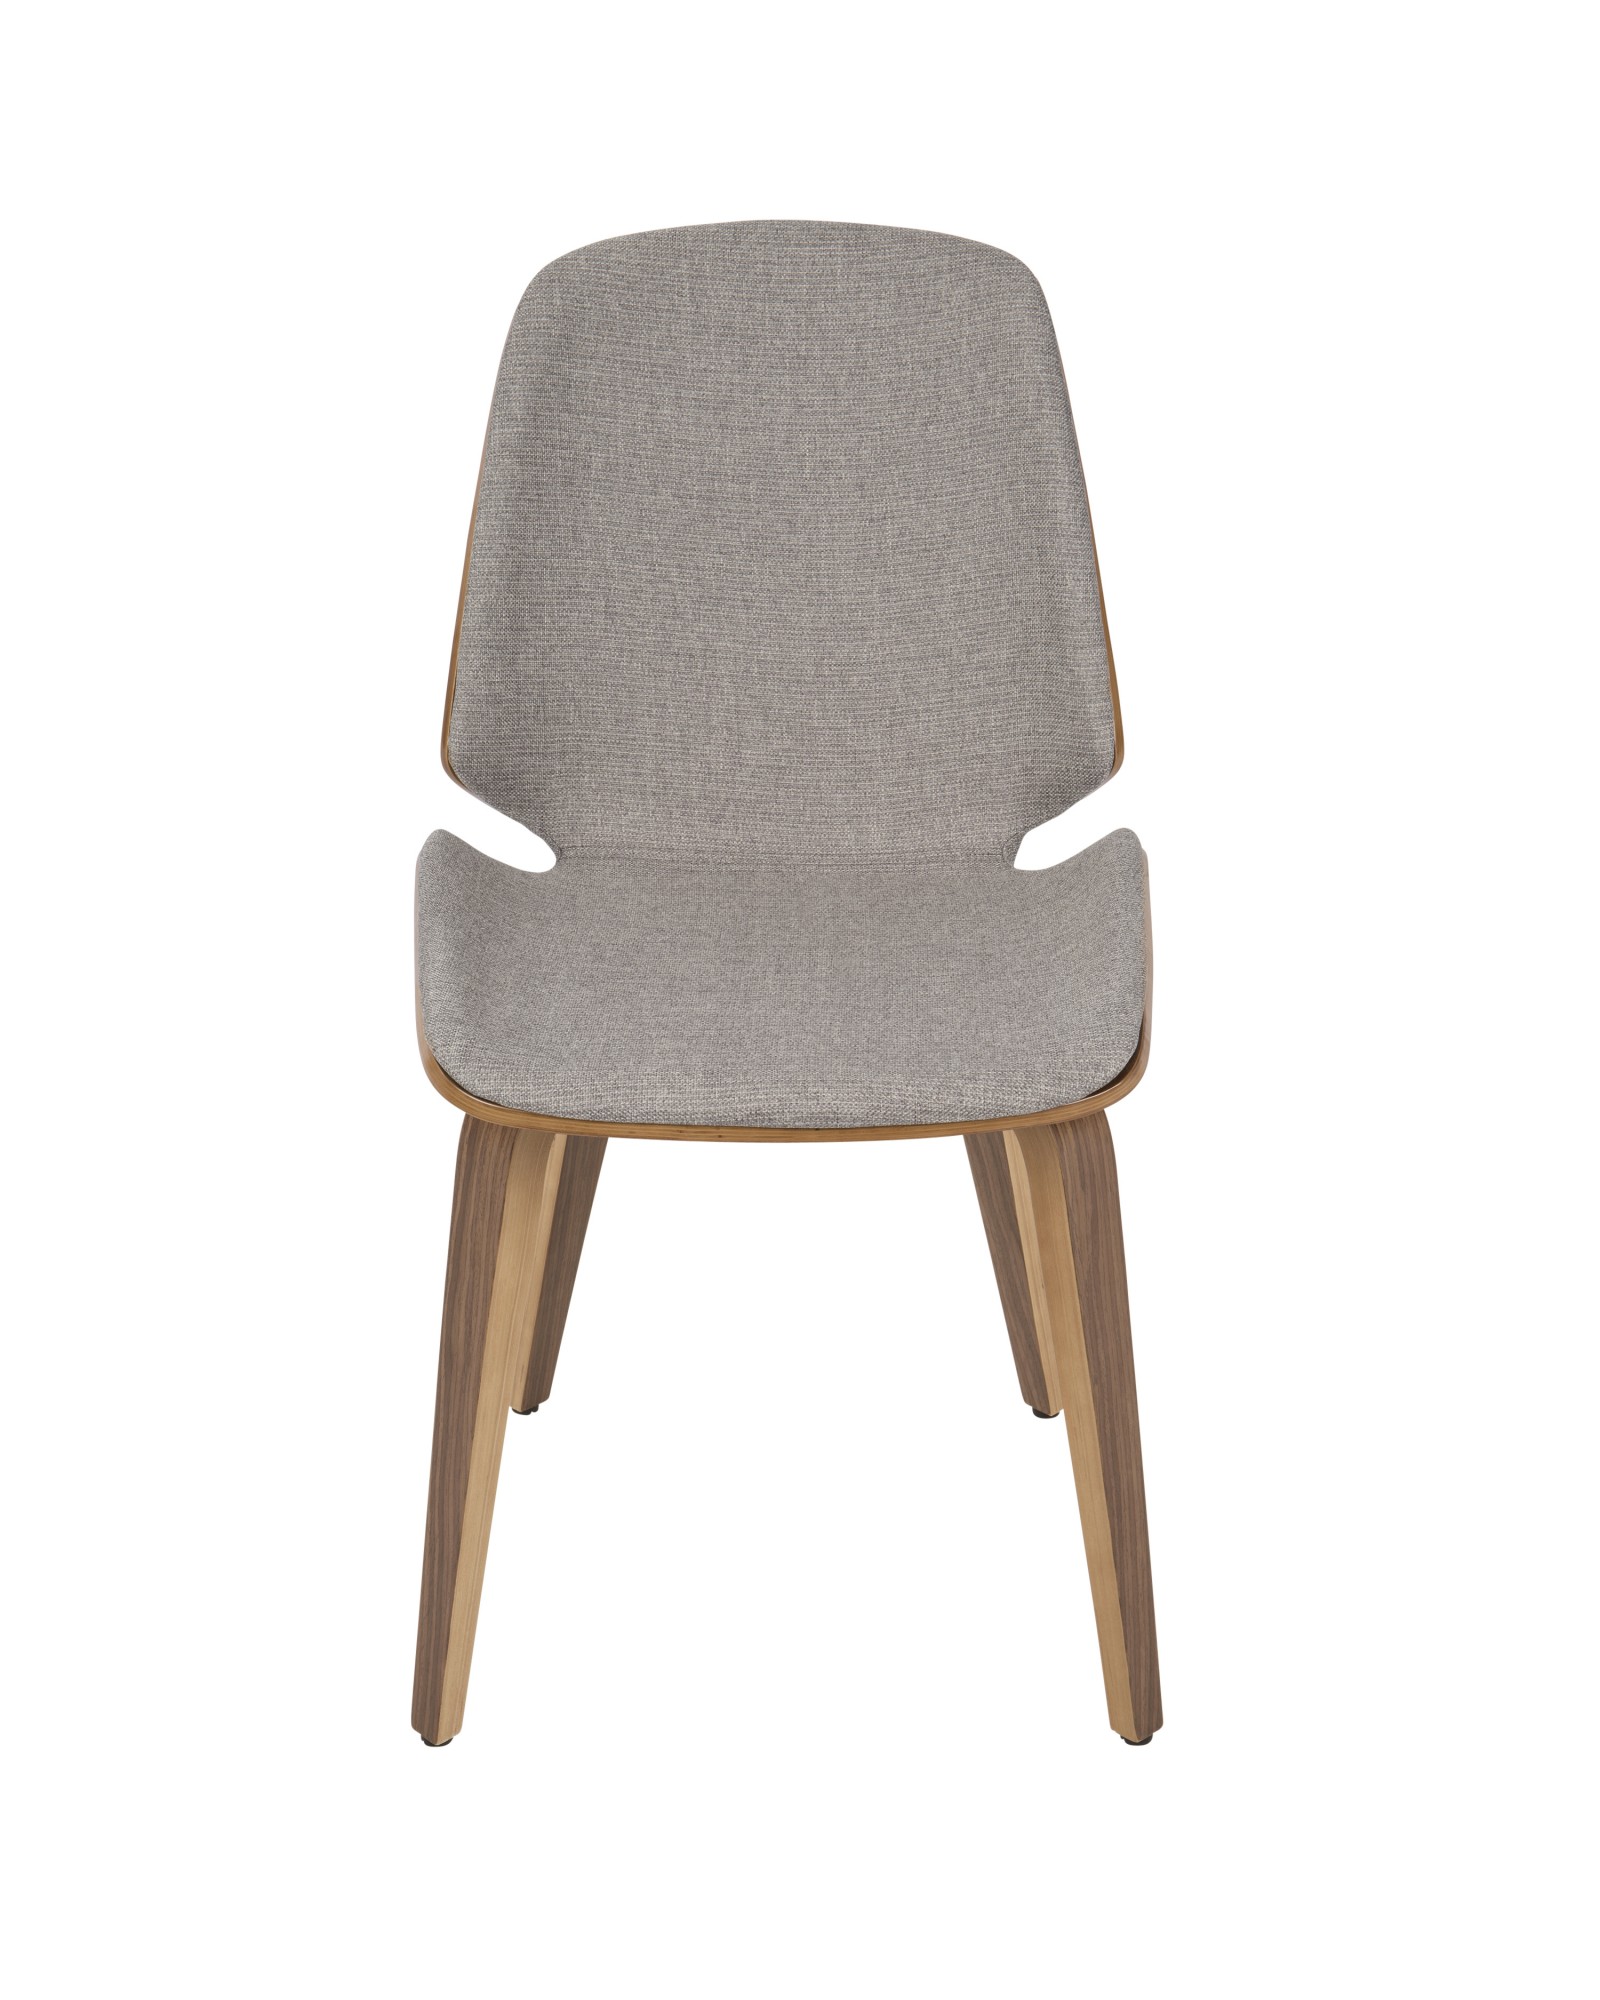 Serena Mid-Century Modern Dining Chair in Walnut with Light Grey Fabric - Set of 2